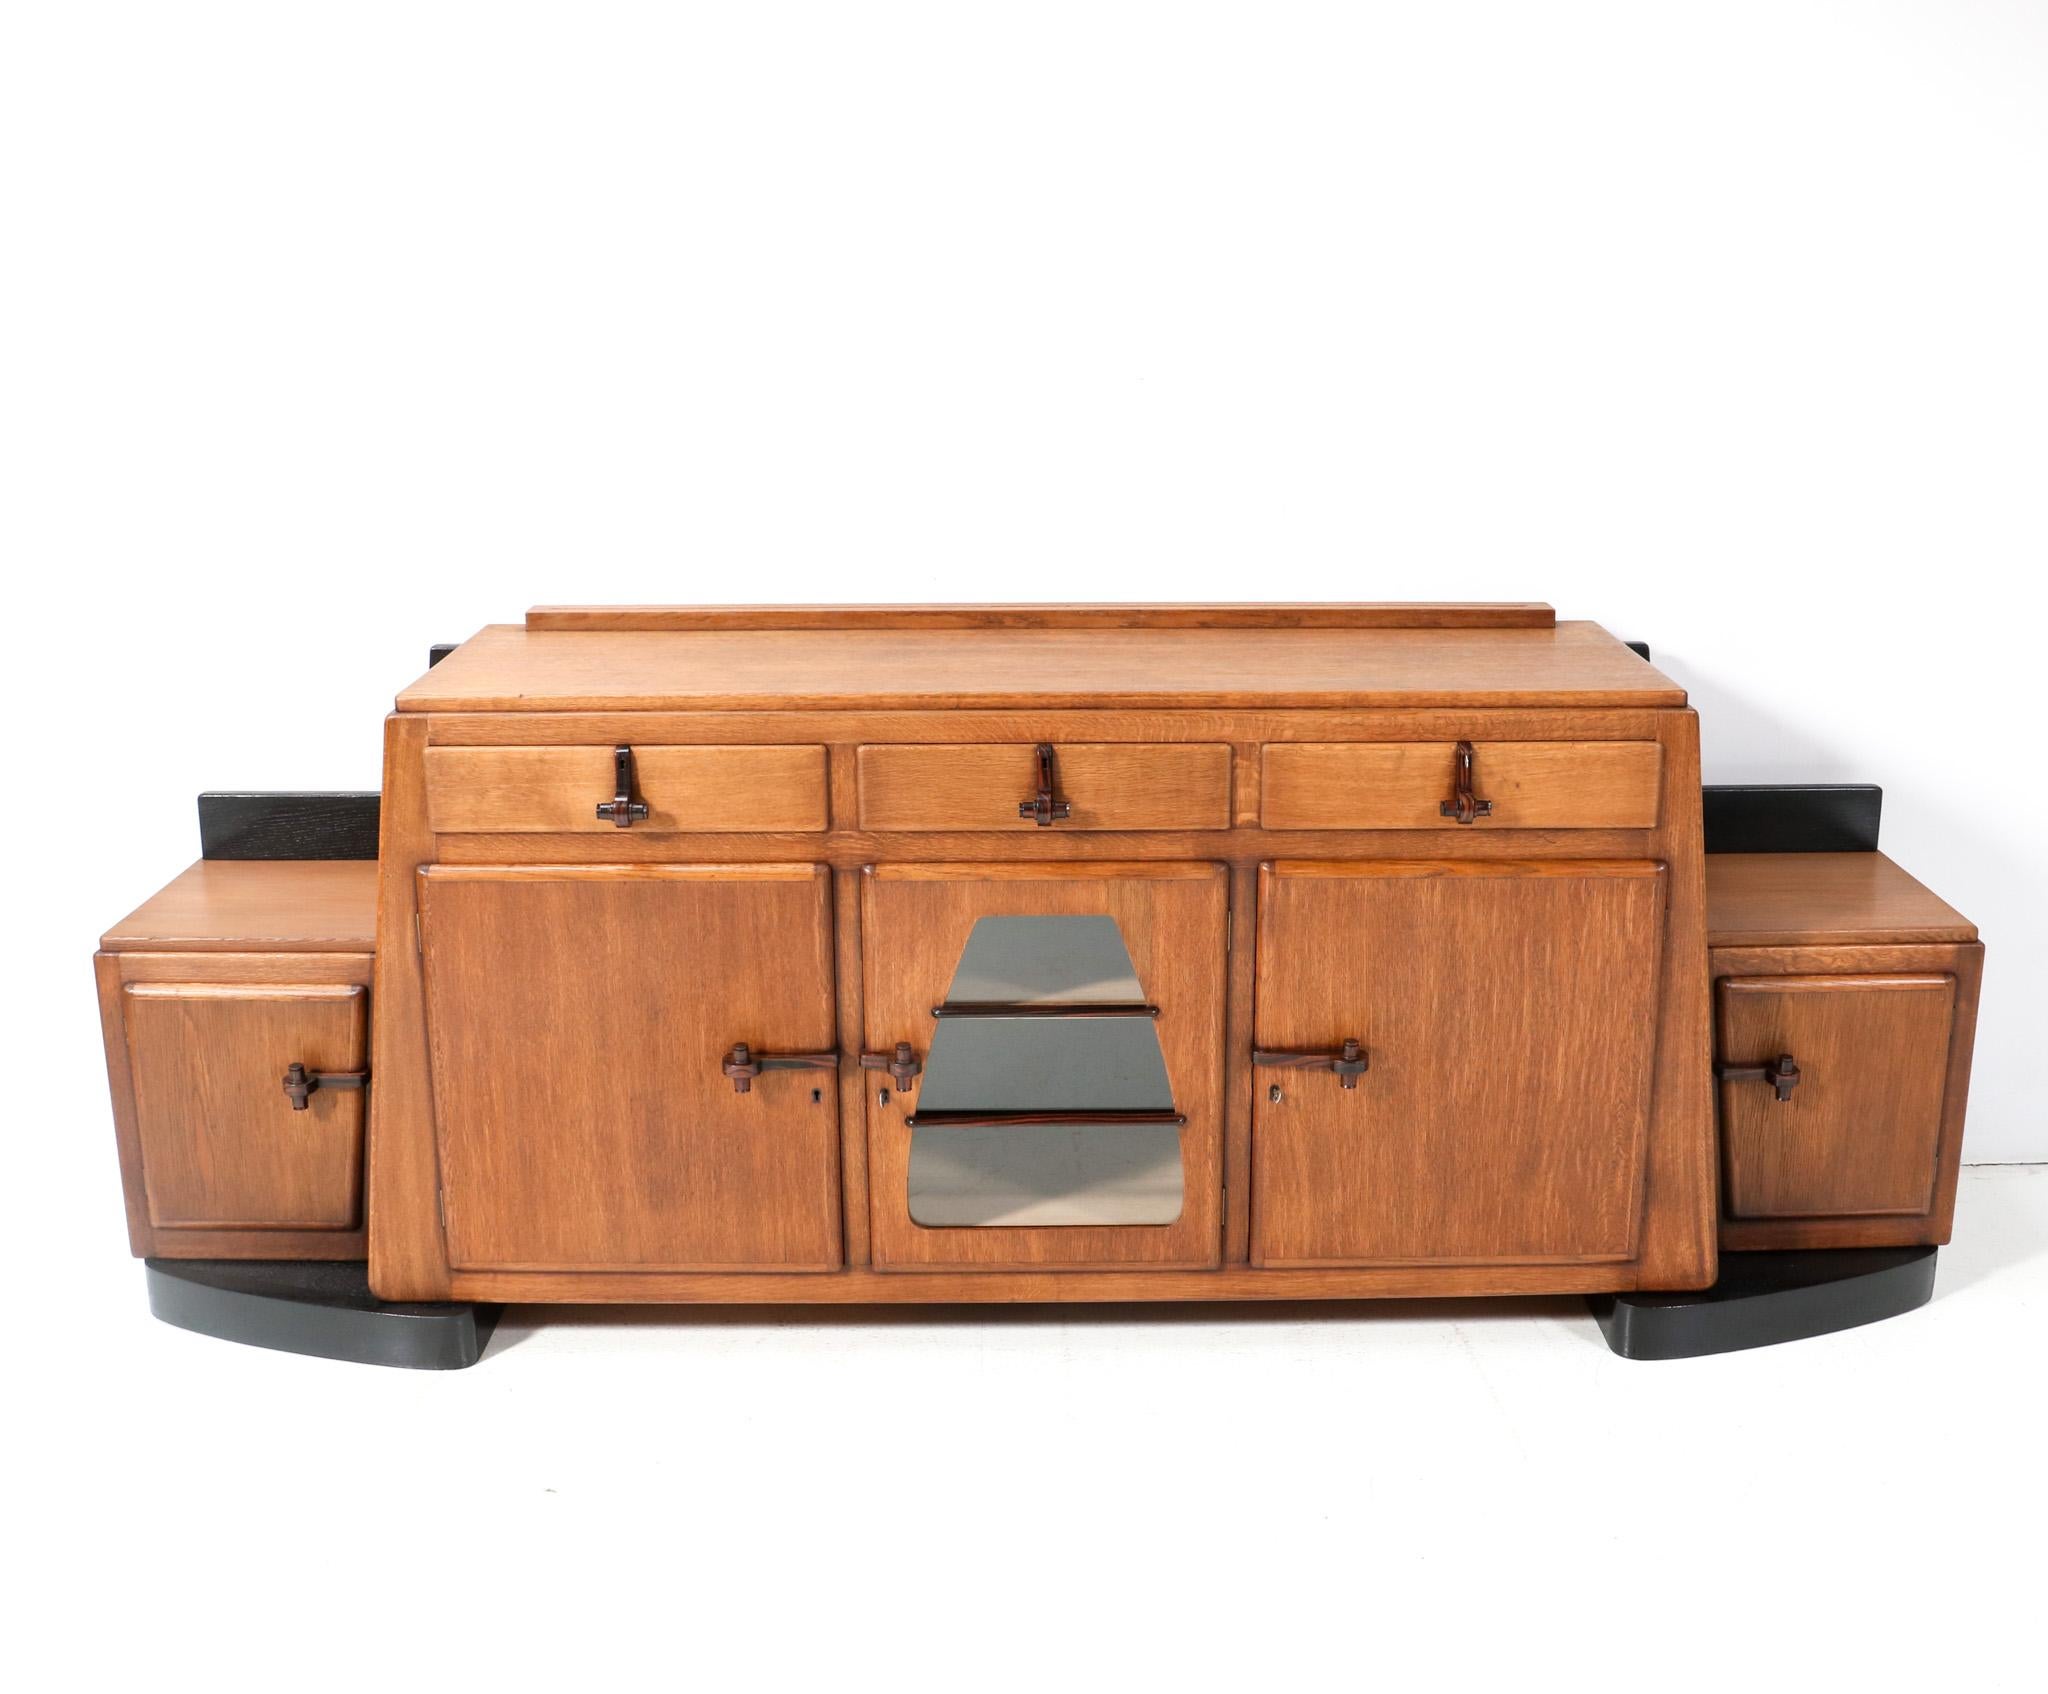 Magnificent and ultra rare large Art Deco Amsterdamse School credenza or sideboard.
Design by Pieter Vorkink and Jacob Wormser.
Striking Dutch design from around 1920.
Solid oak and original oak veneer base with original black lacquered